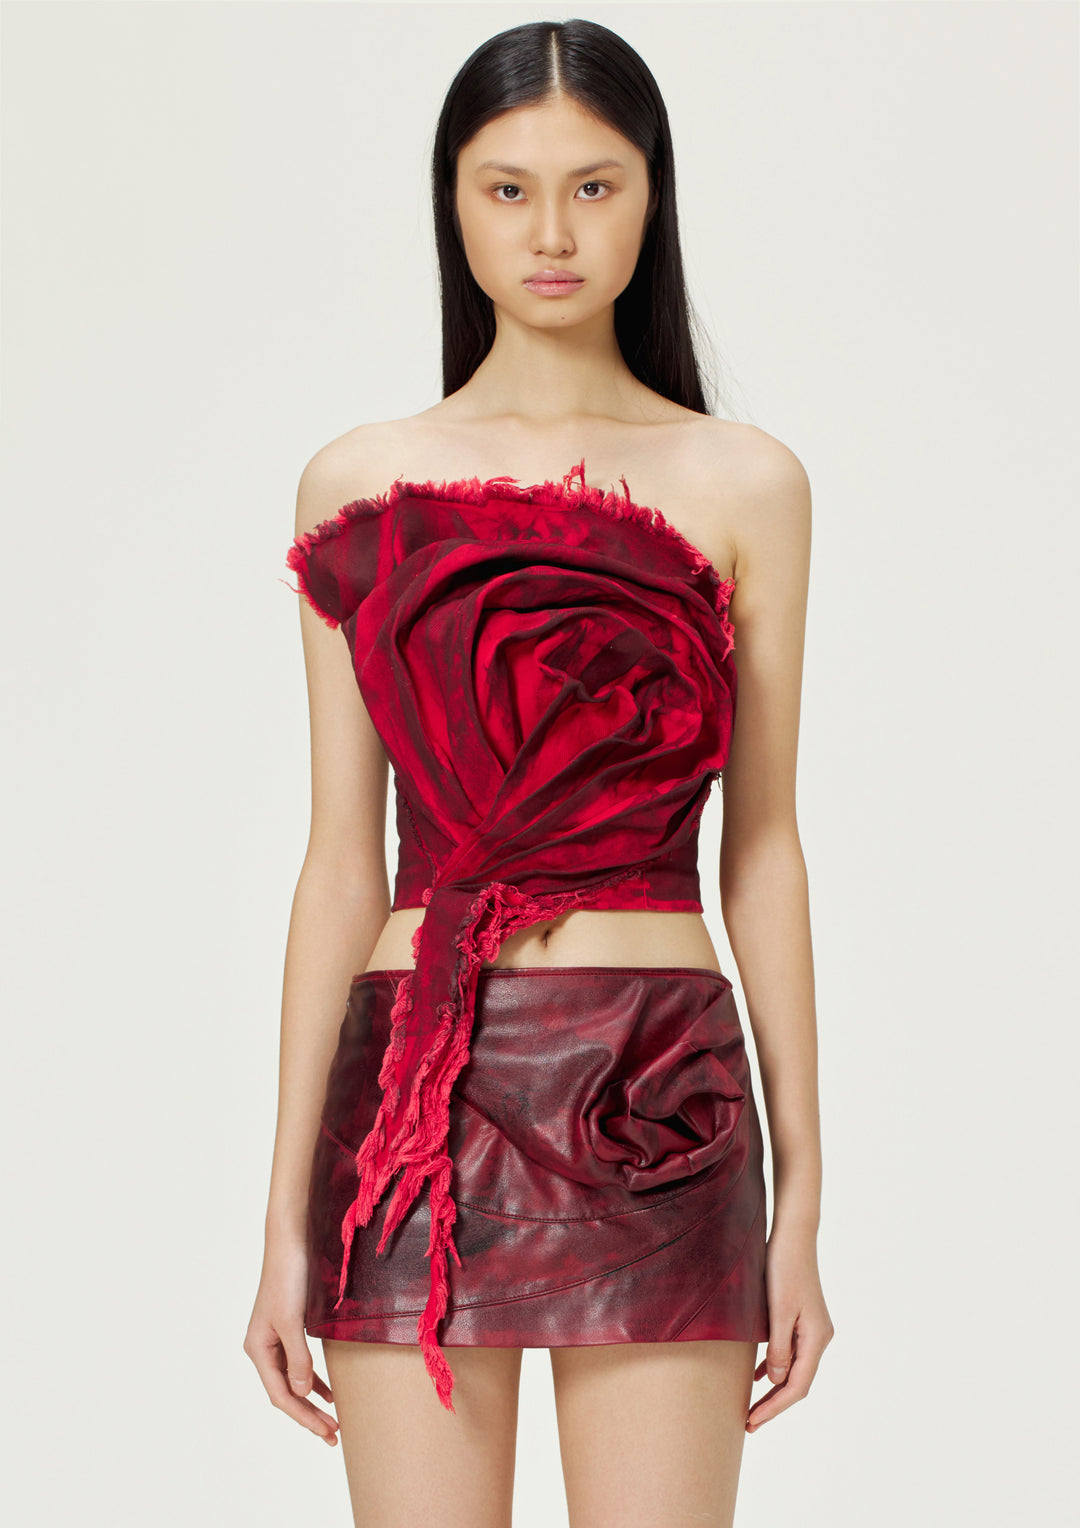 Floral Sheath with Red Ruffles